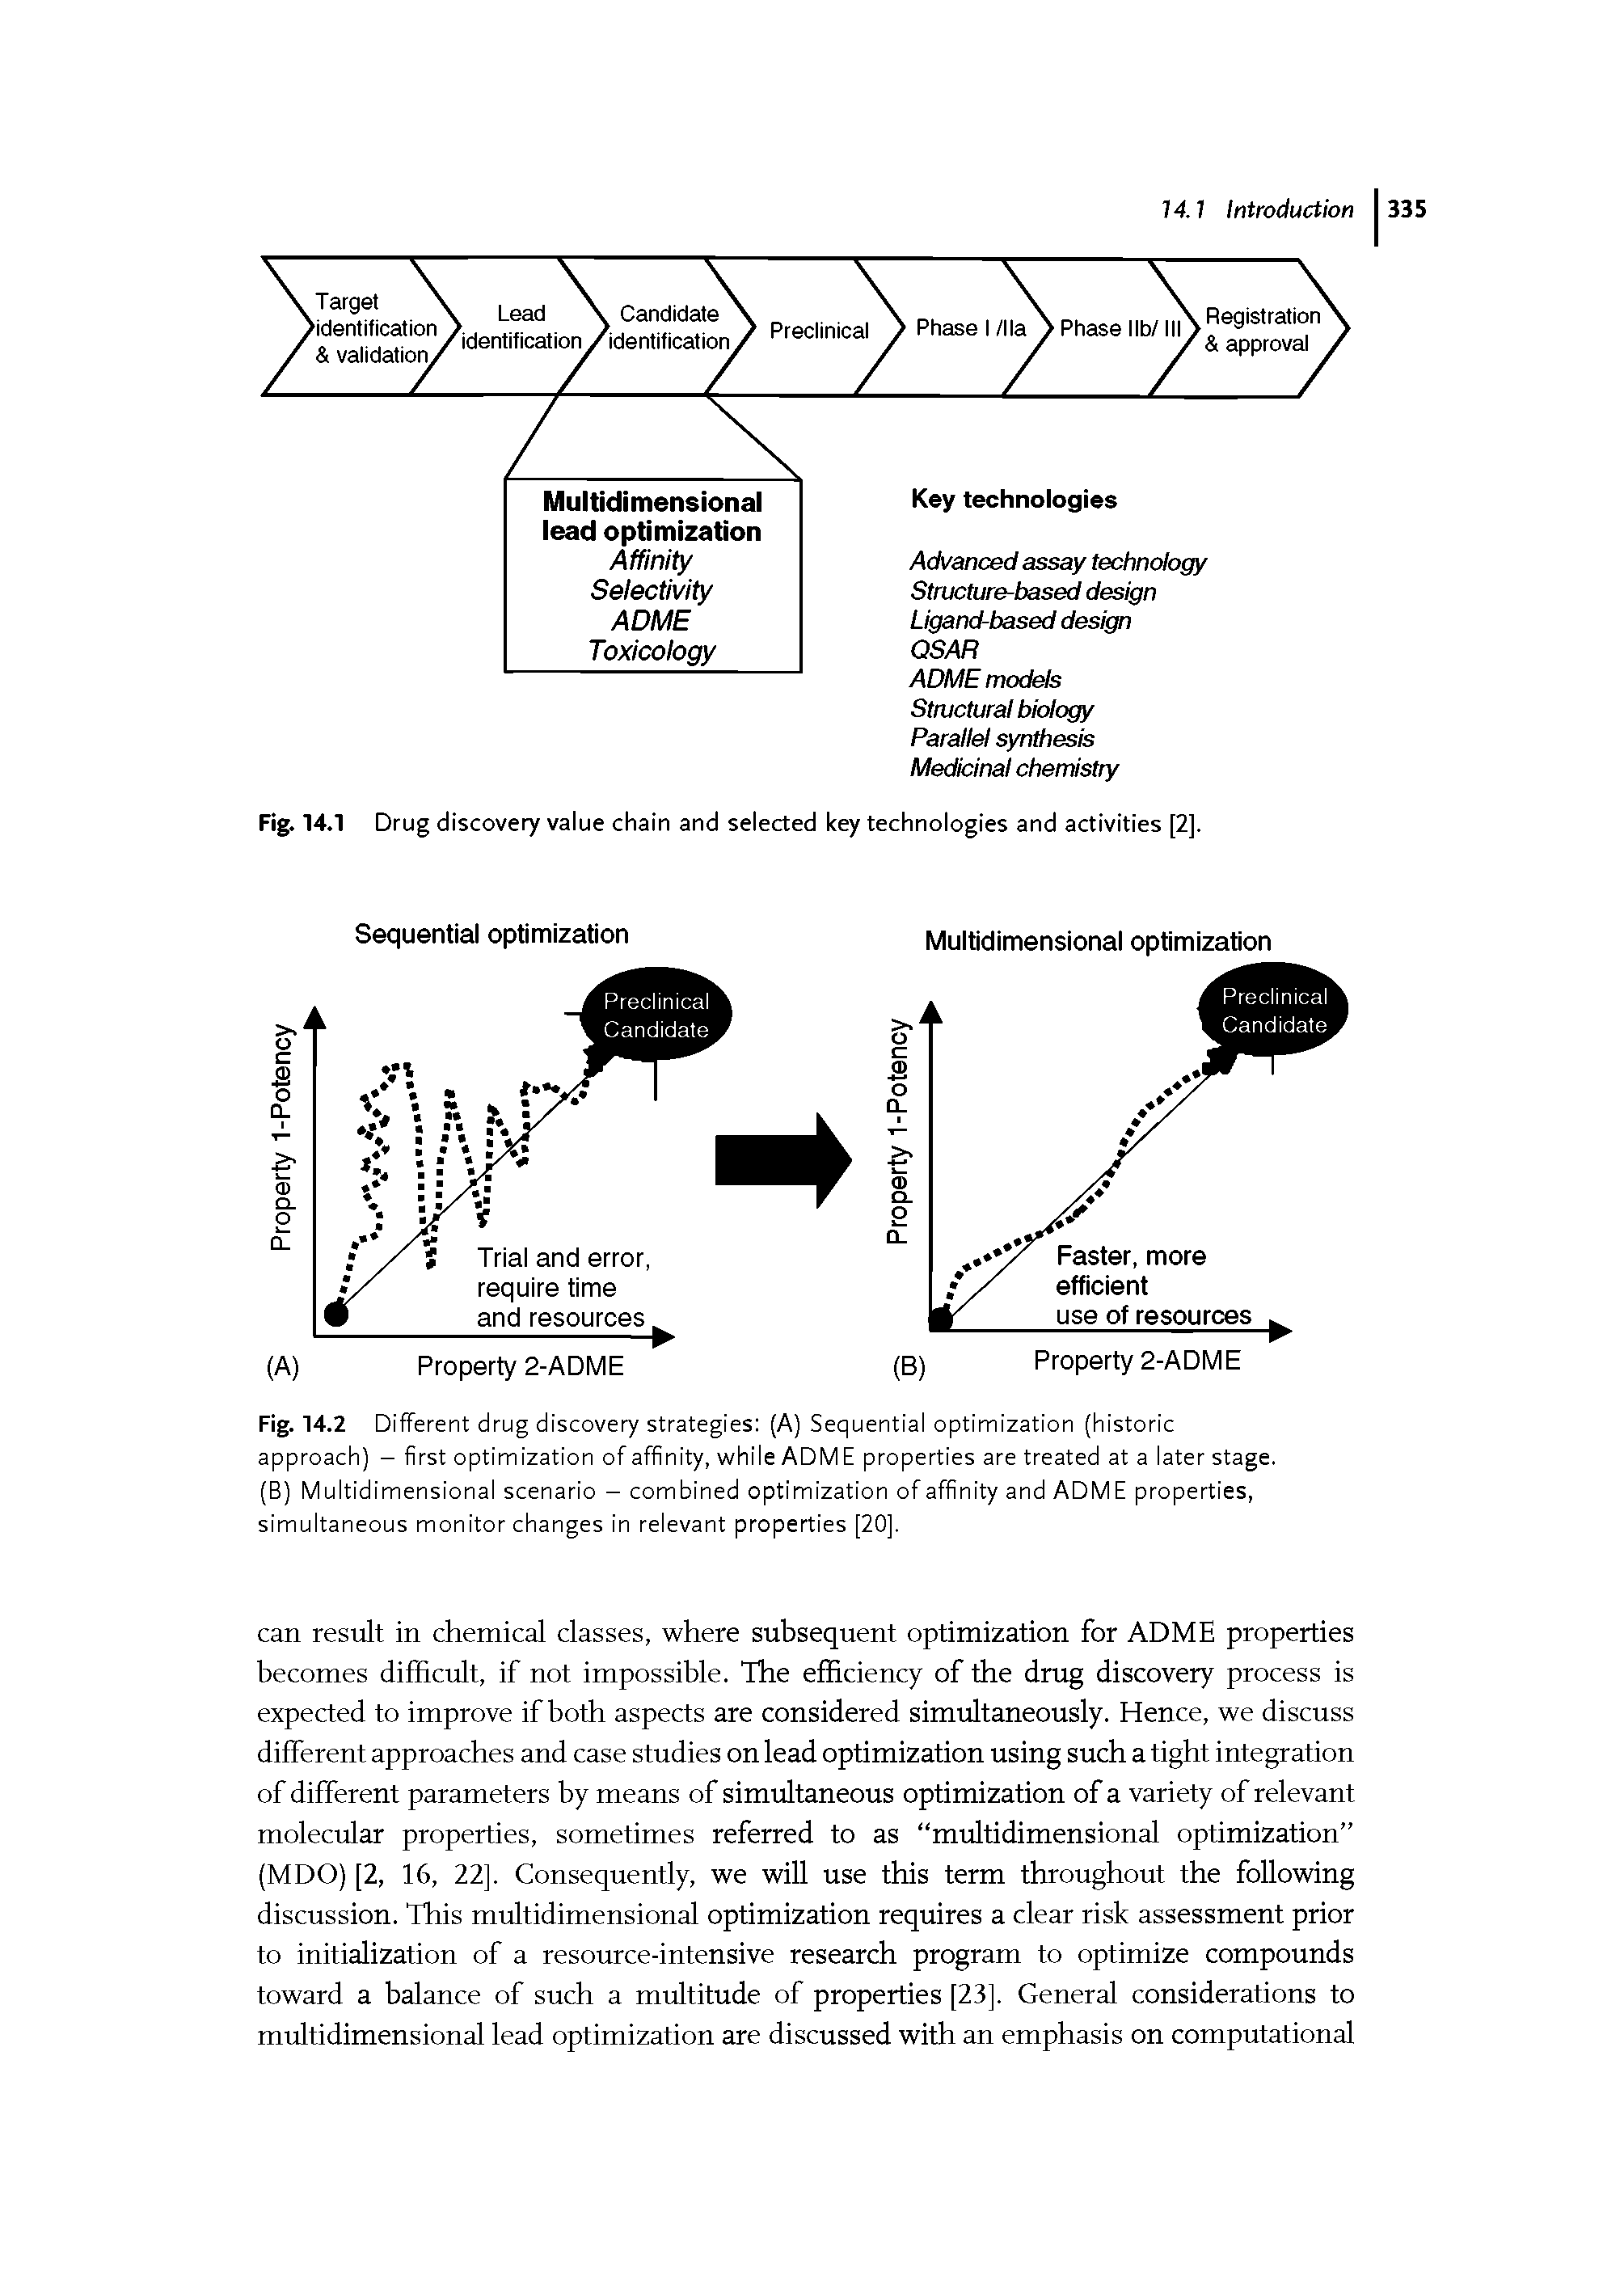 Fig. 14.2 Different drug discovery strategies (A) Sequential optimization (historic approach) - first optimization of affinity, while ADME properties are treated at a later stage. (B) Multidimensional scenario - combined optimization of affinity and ADME properties, simultaneous monitor changes in relevant properties [20],...